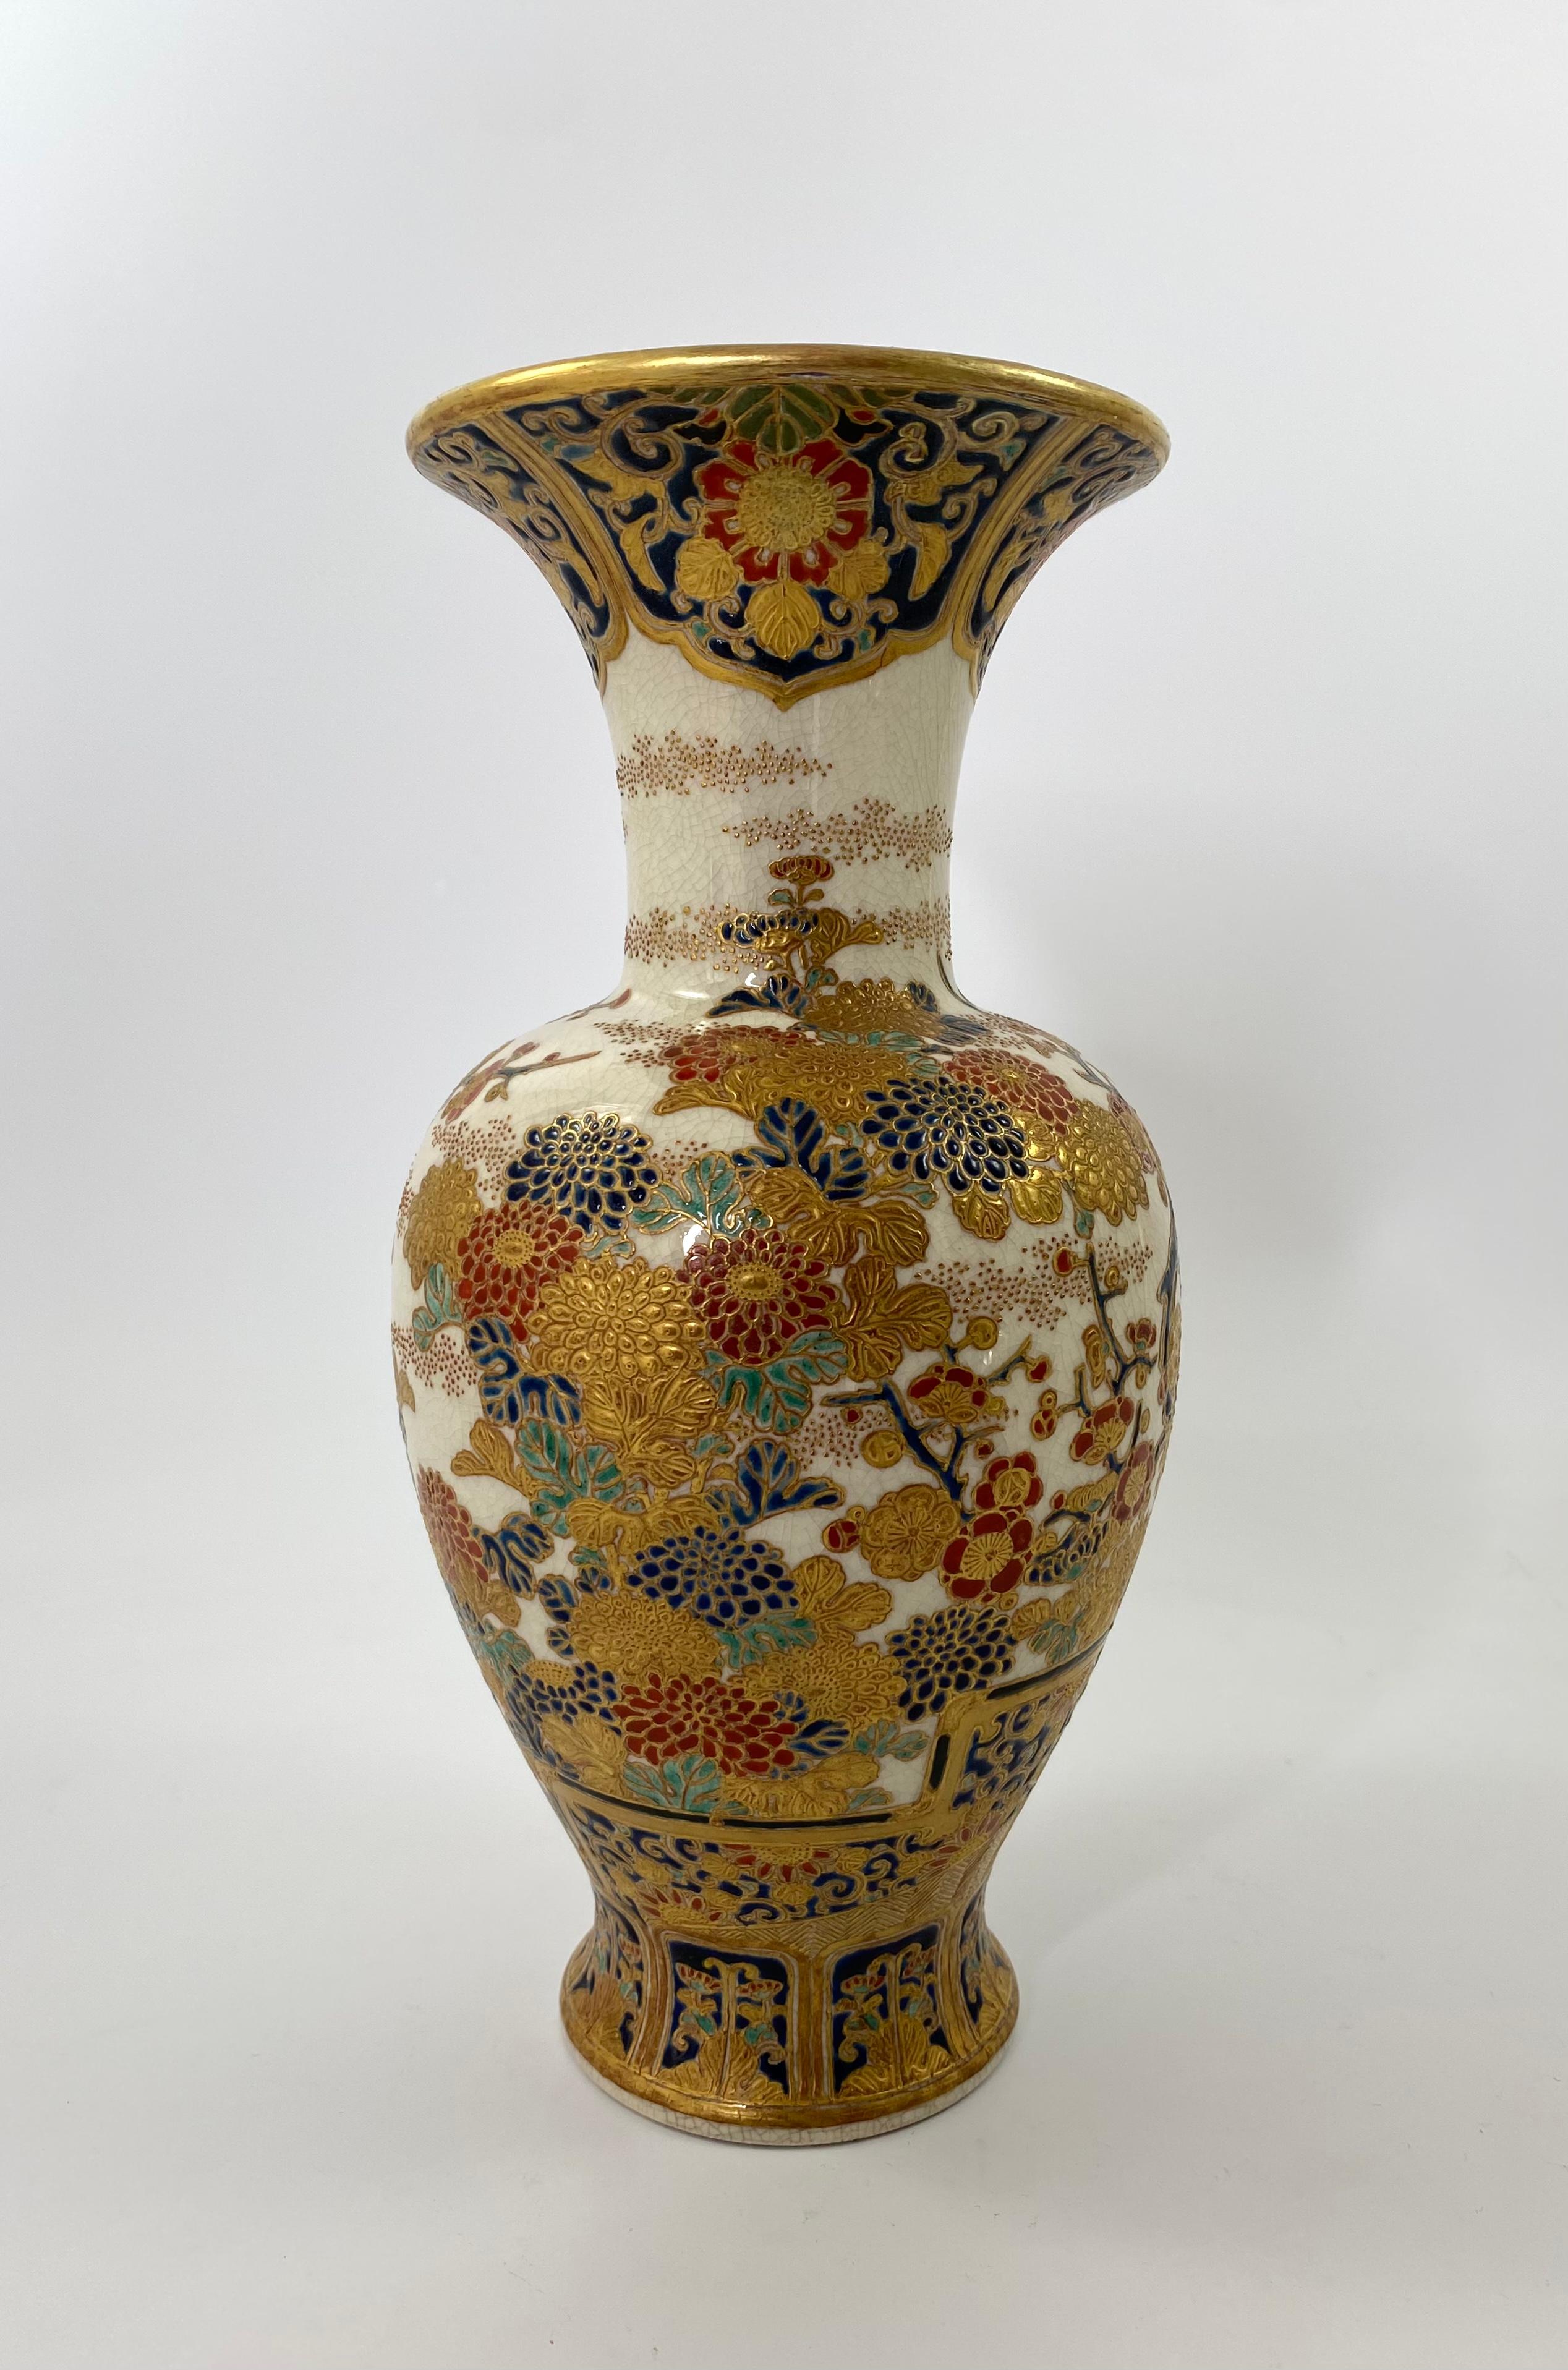 Fine Imperial Satsuma pottery vase, c. 1880, Meiji Period. The baluster shaped vase, hand painted in bold enamels, and heavy gilt, with a scene of a Japanese cherry blossom tree, amongst other flowering plants, before an elaborate fence. The neck